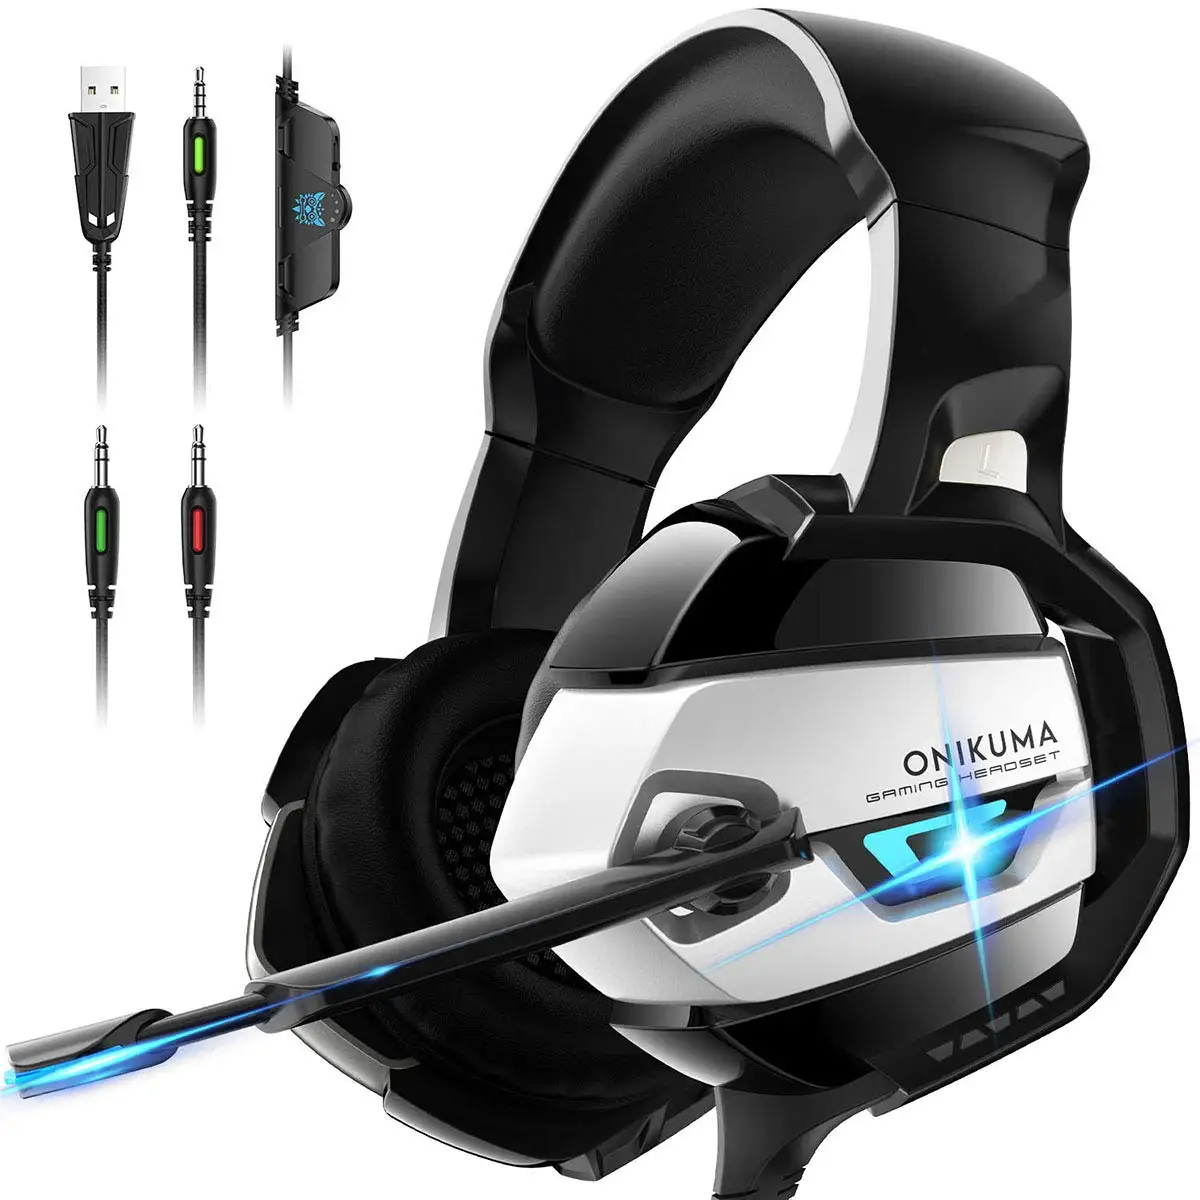 

ONIKUMA K5 Auriculares Gaming Headset Best Stereo Headphones Gamer with Microphone Mic Led Light for Xbox One